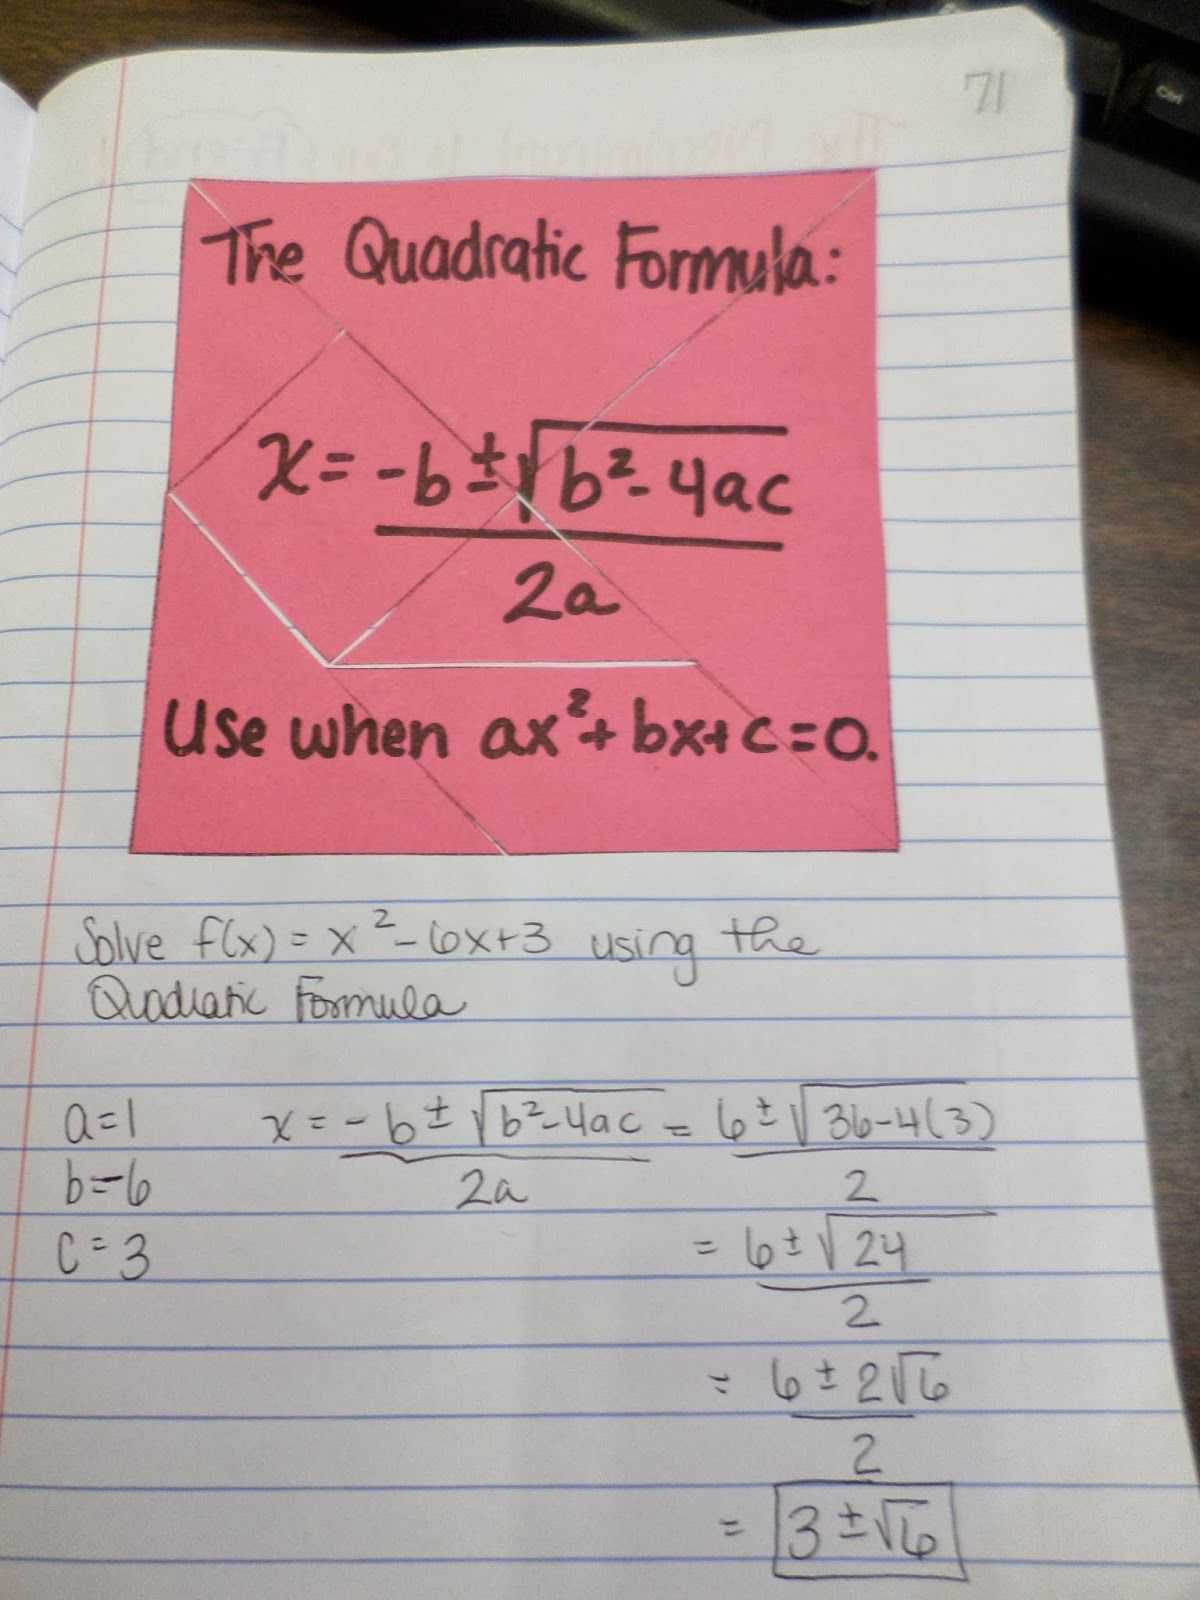 Algebra 2 Factoring Worksheet as Well as Math = Love solving Quadratics by Factoring and the Zero Product